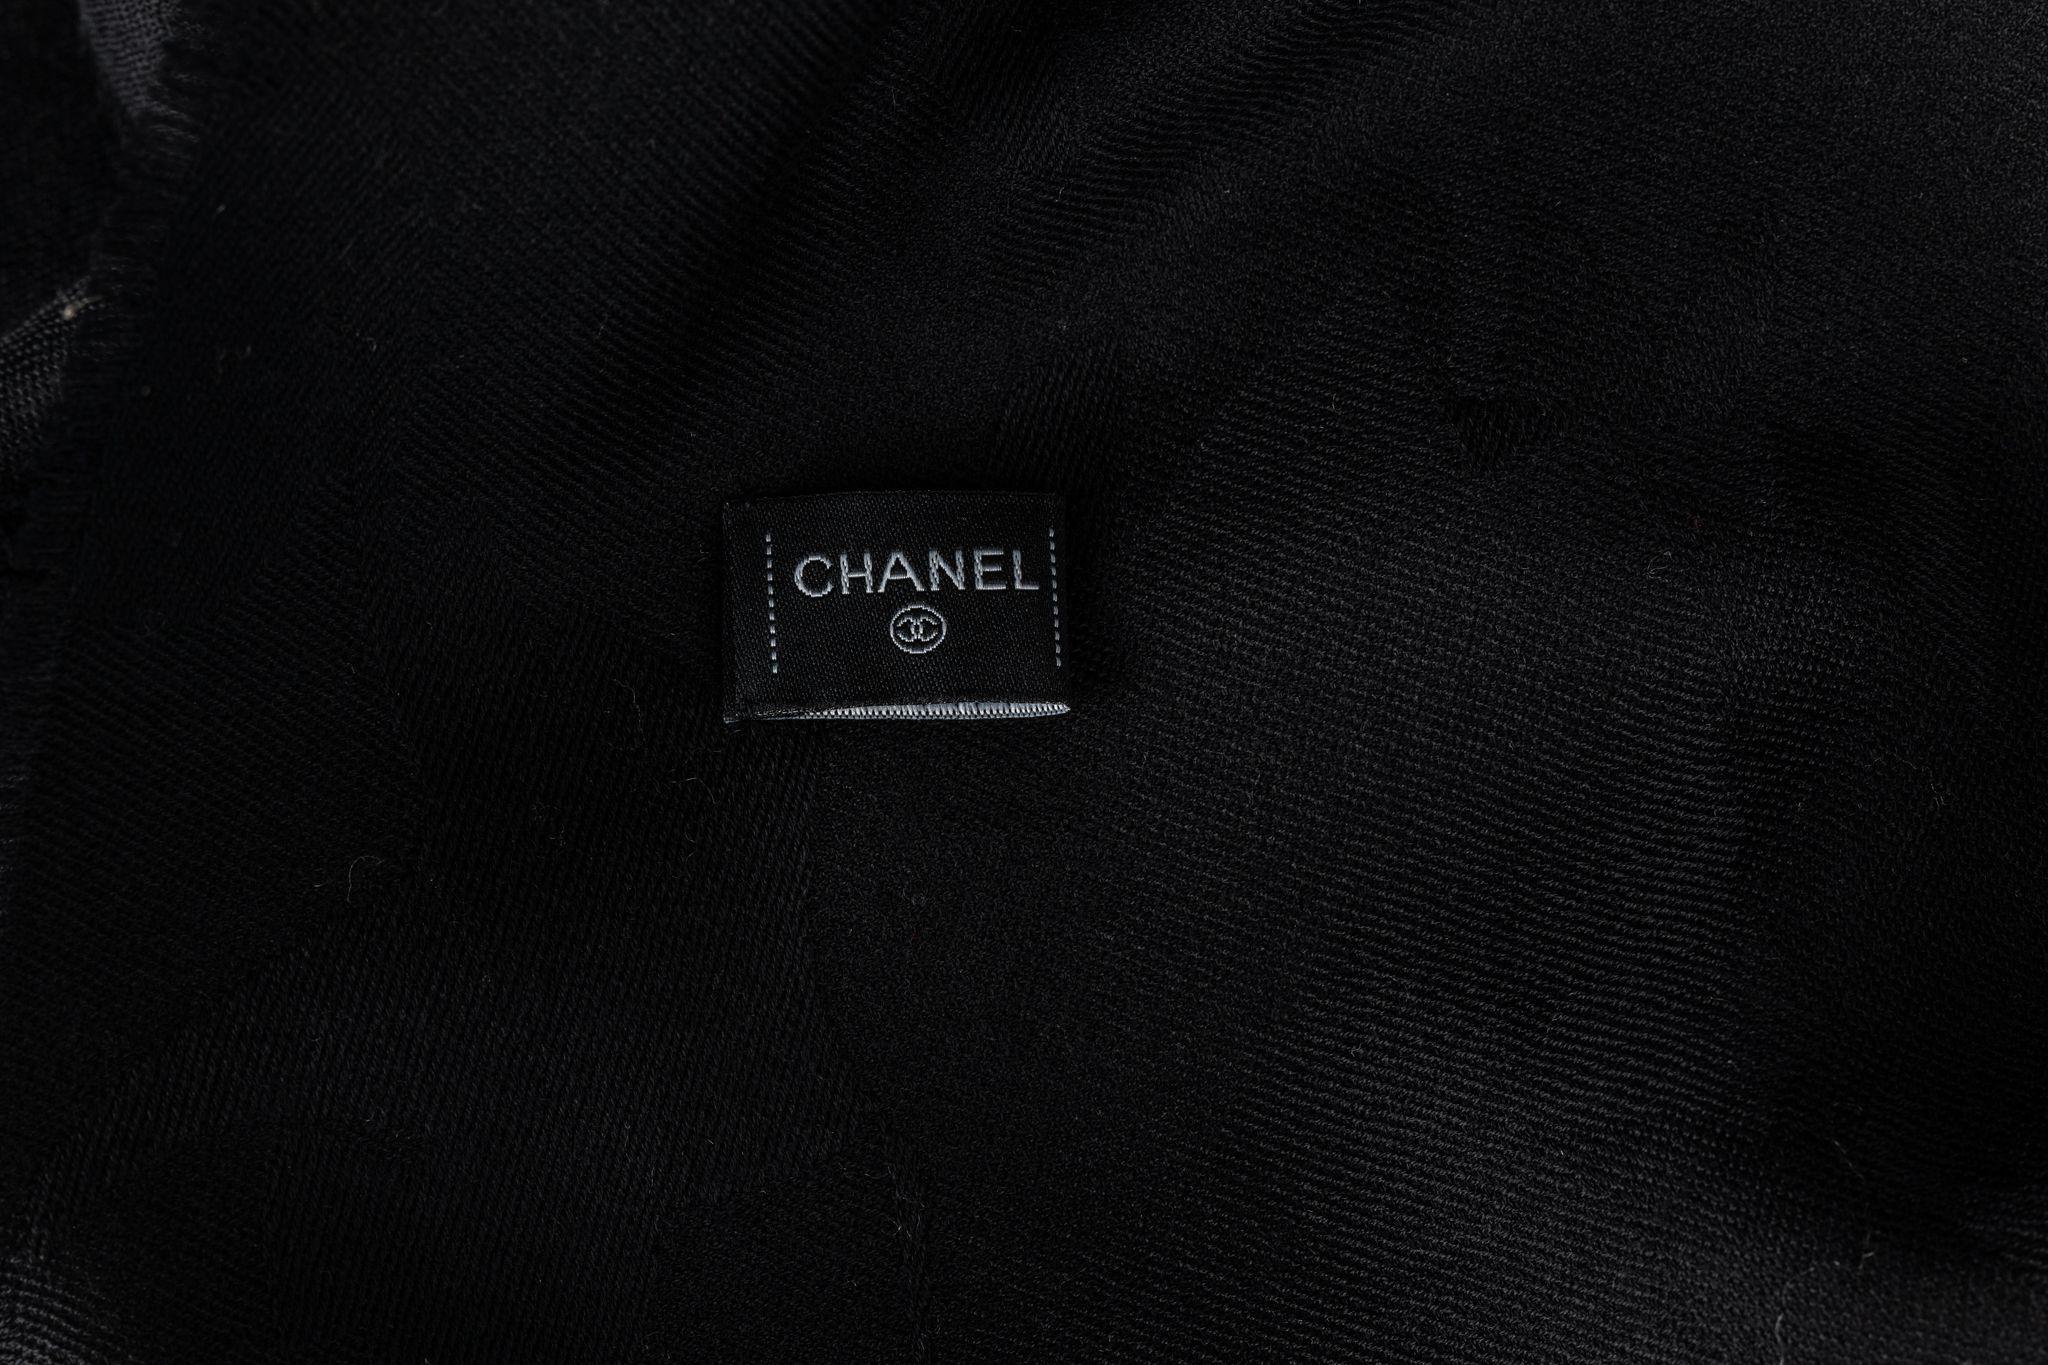 Chanel Black Cashmere Shawl In Excellent Condition For Sale In West Hollywood, CA